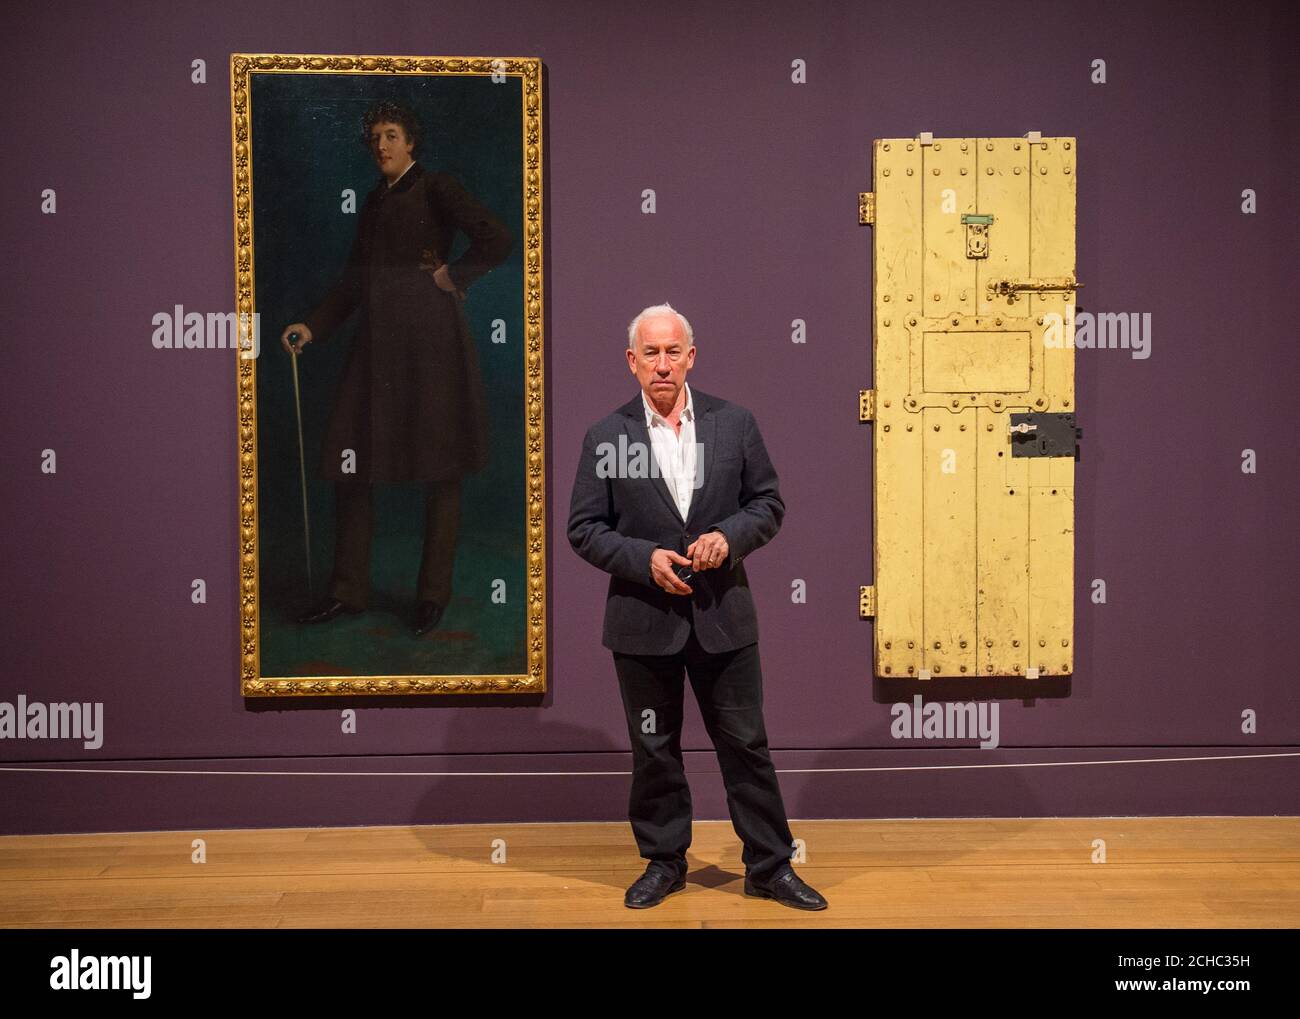 Actor Simon Callow with 'Oscar Wilde' by Robert Goodloe Harper Pennington (left) and Oscar Wilde's prison door from Reading Gaol, during a photo call at the Tate Britain in London for their Queer British Art 1861 -1967 exhibition. Stock Photo